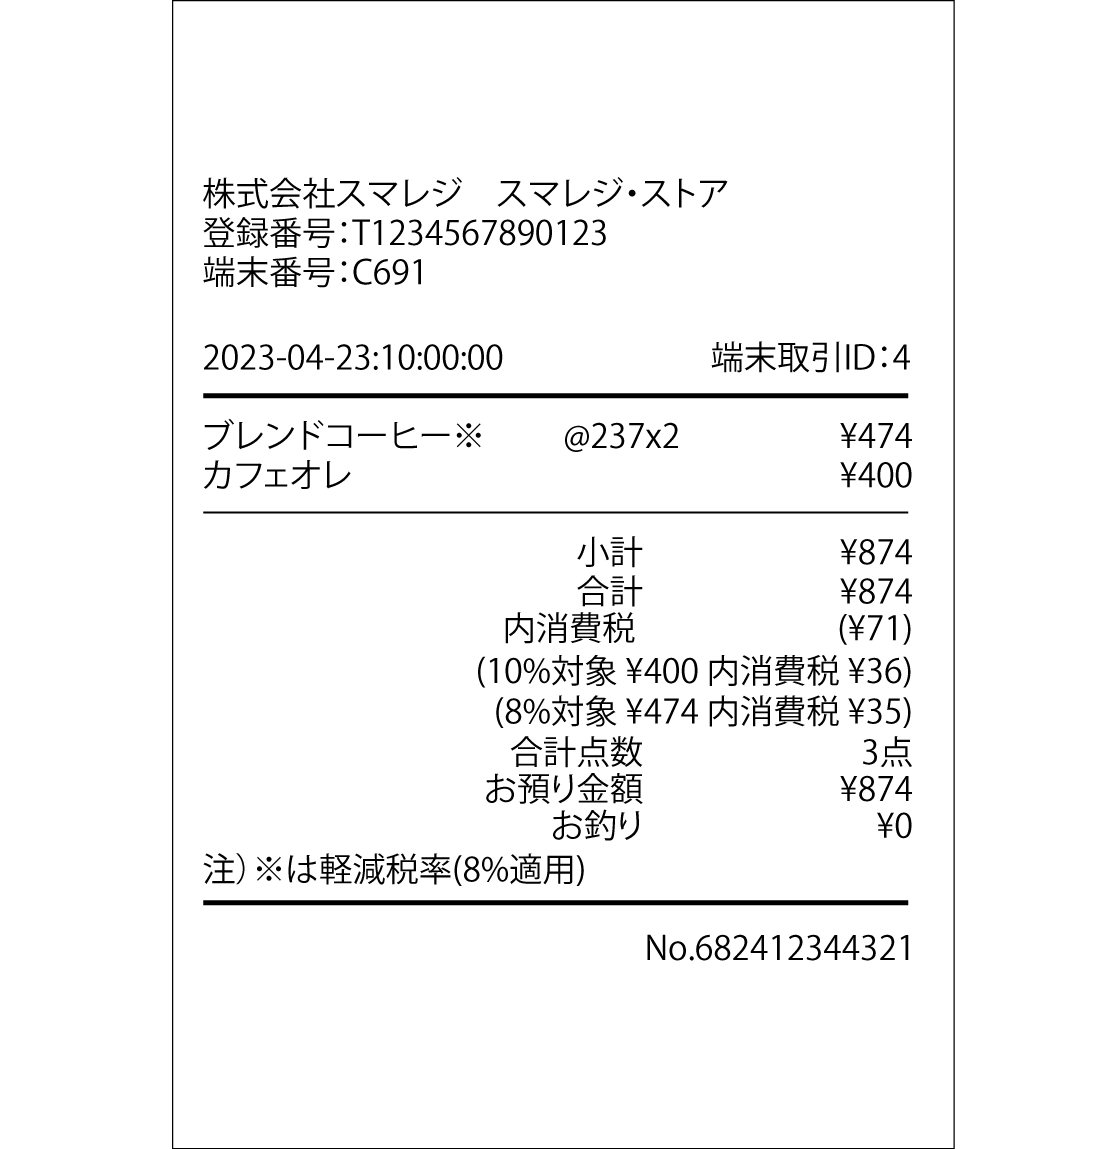 invoice-image-03.png